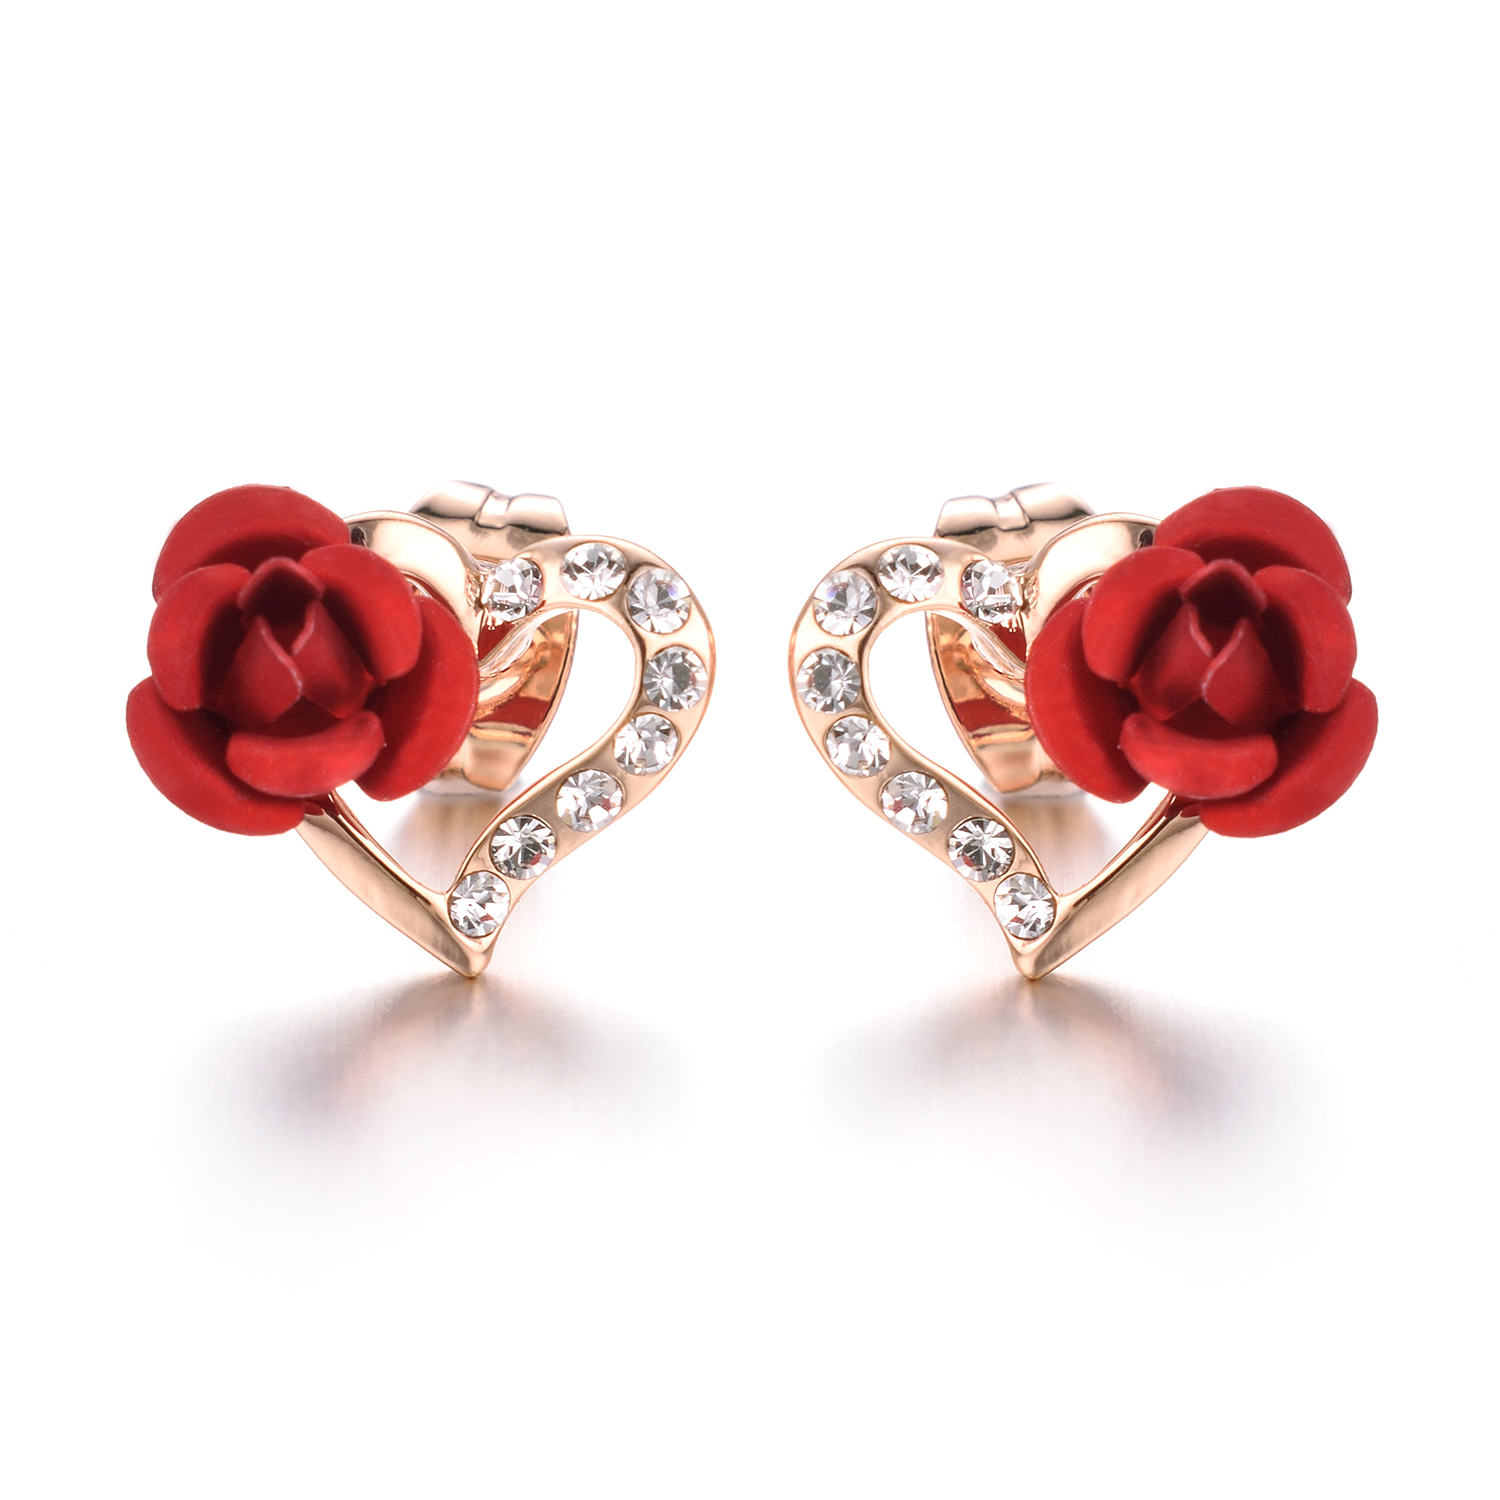 

Yoursfs 6 Pairs/Set Red Rose Heart-shaped Stud Earrings Fashion Woman Jewelry Wedding Gift 18K Gold Plated